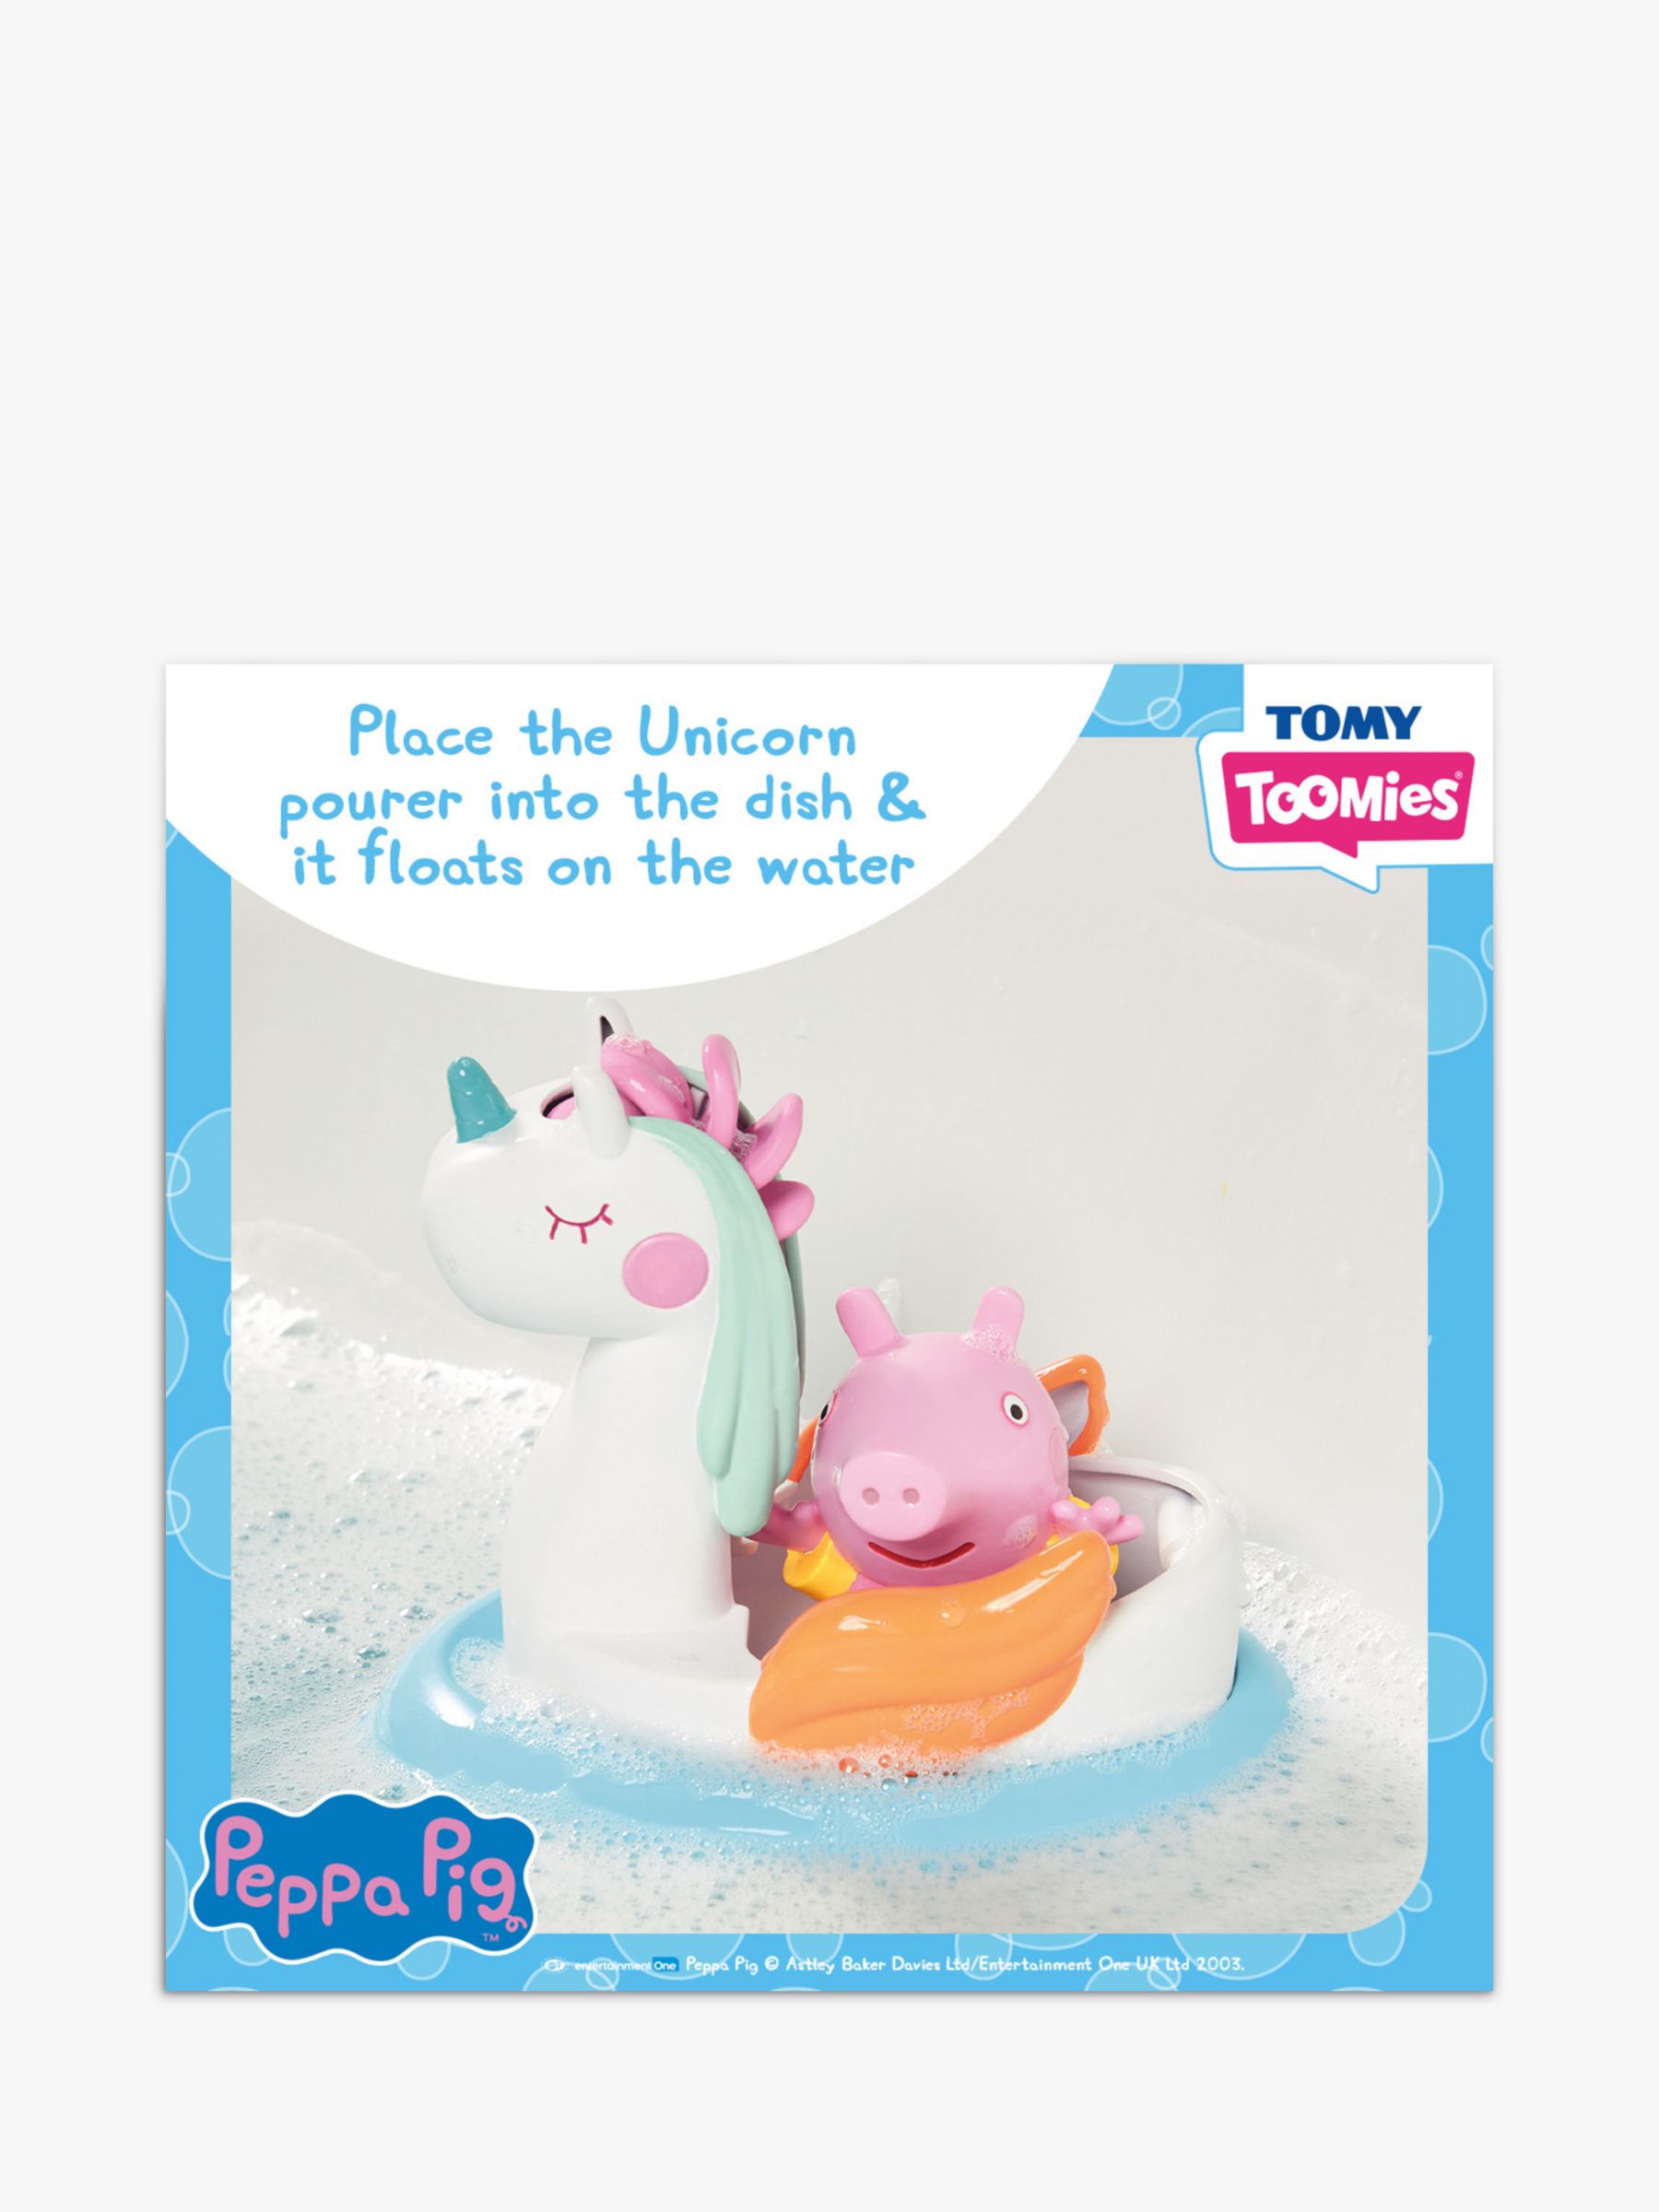 Tomy Toomies Peppa Pig Bath Pourers/Floats Asst Baby Bathtime Toy 18 Month+ 